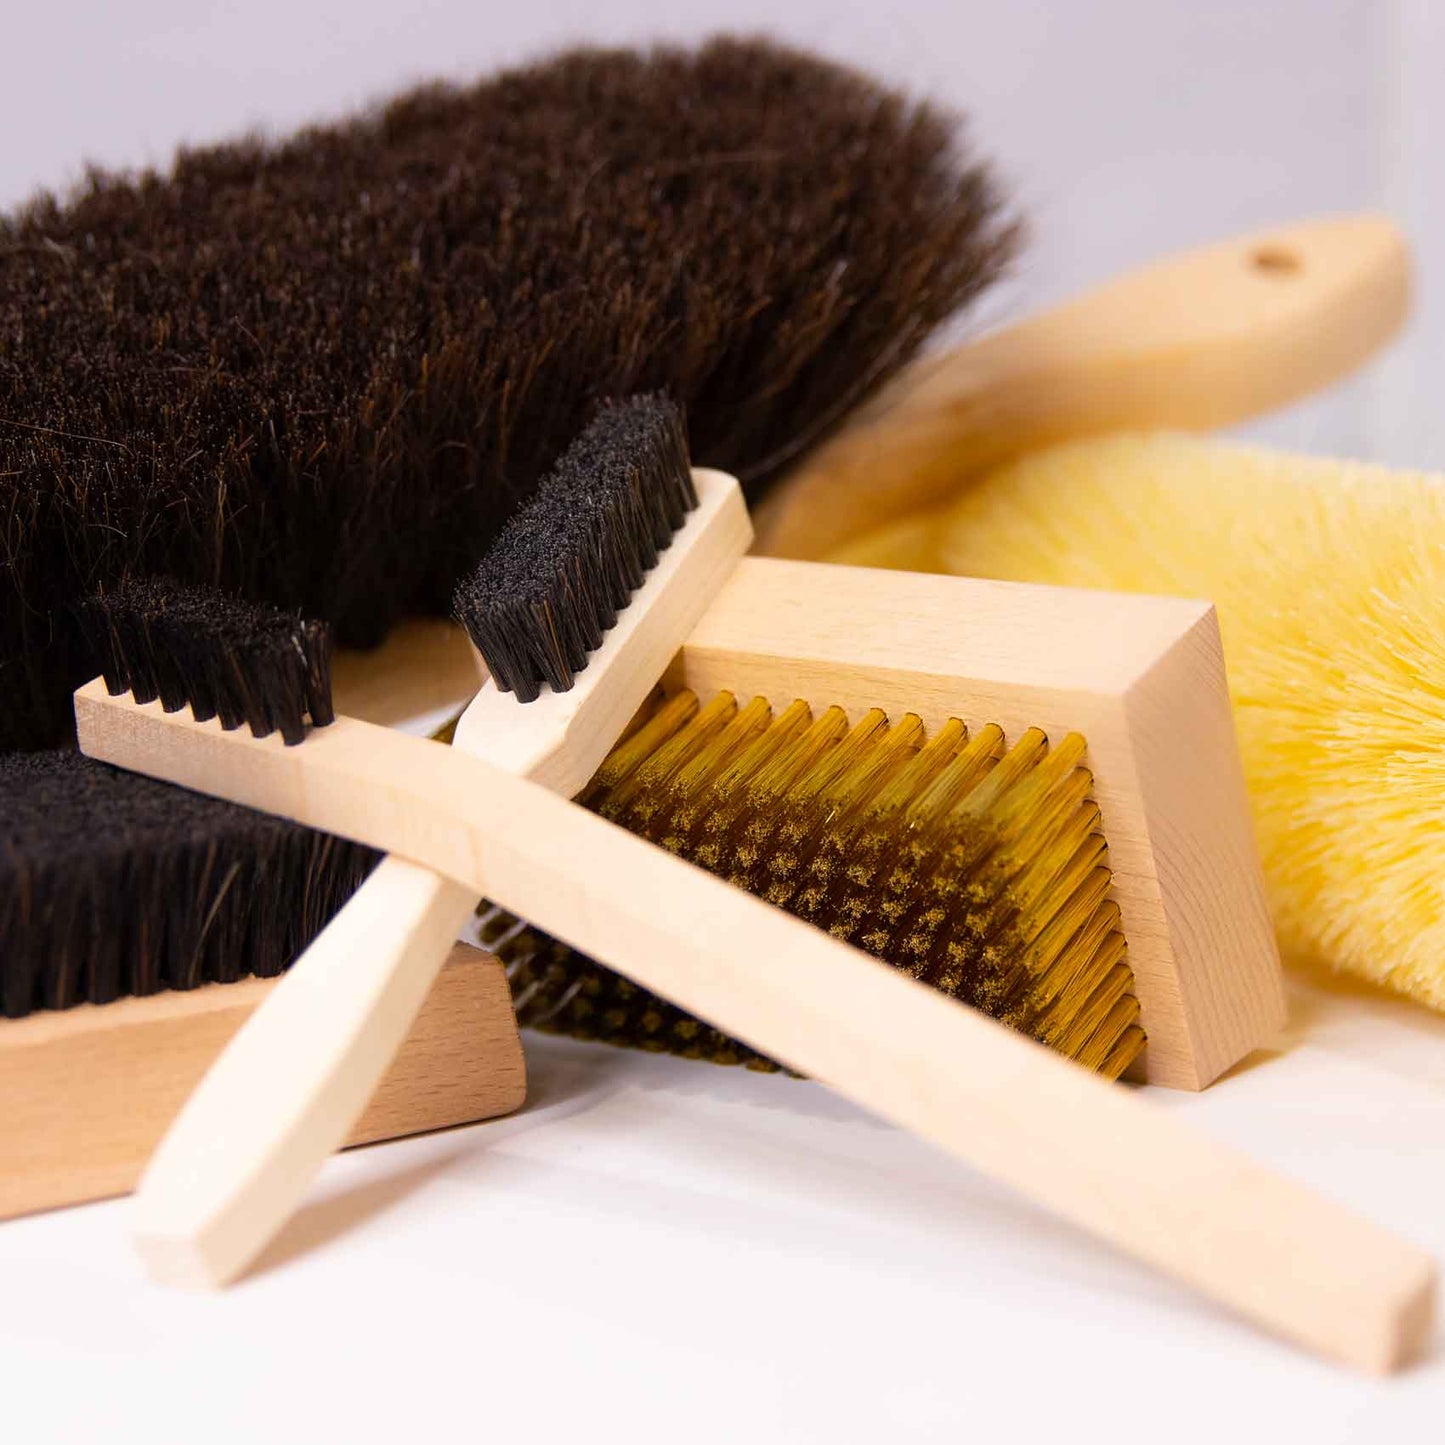 Horse hair brushes that the laundry guy uses